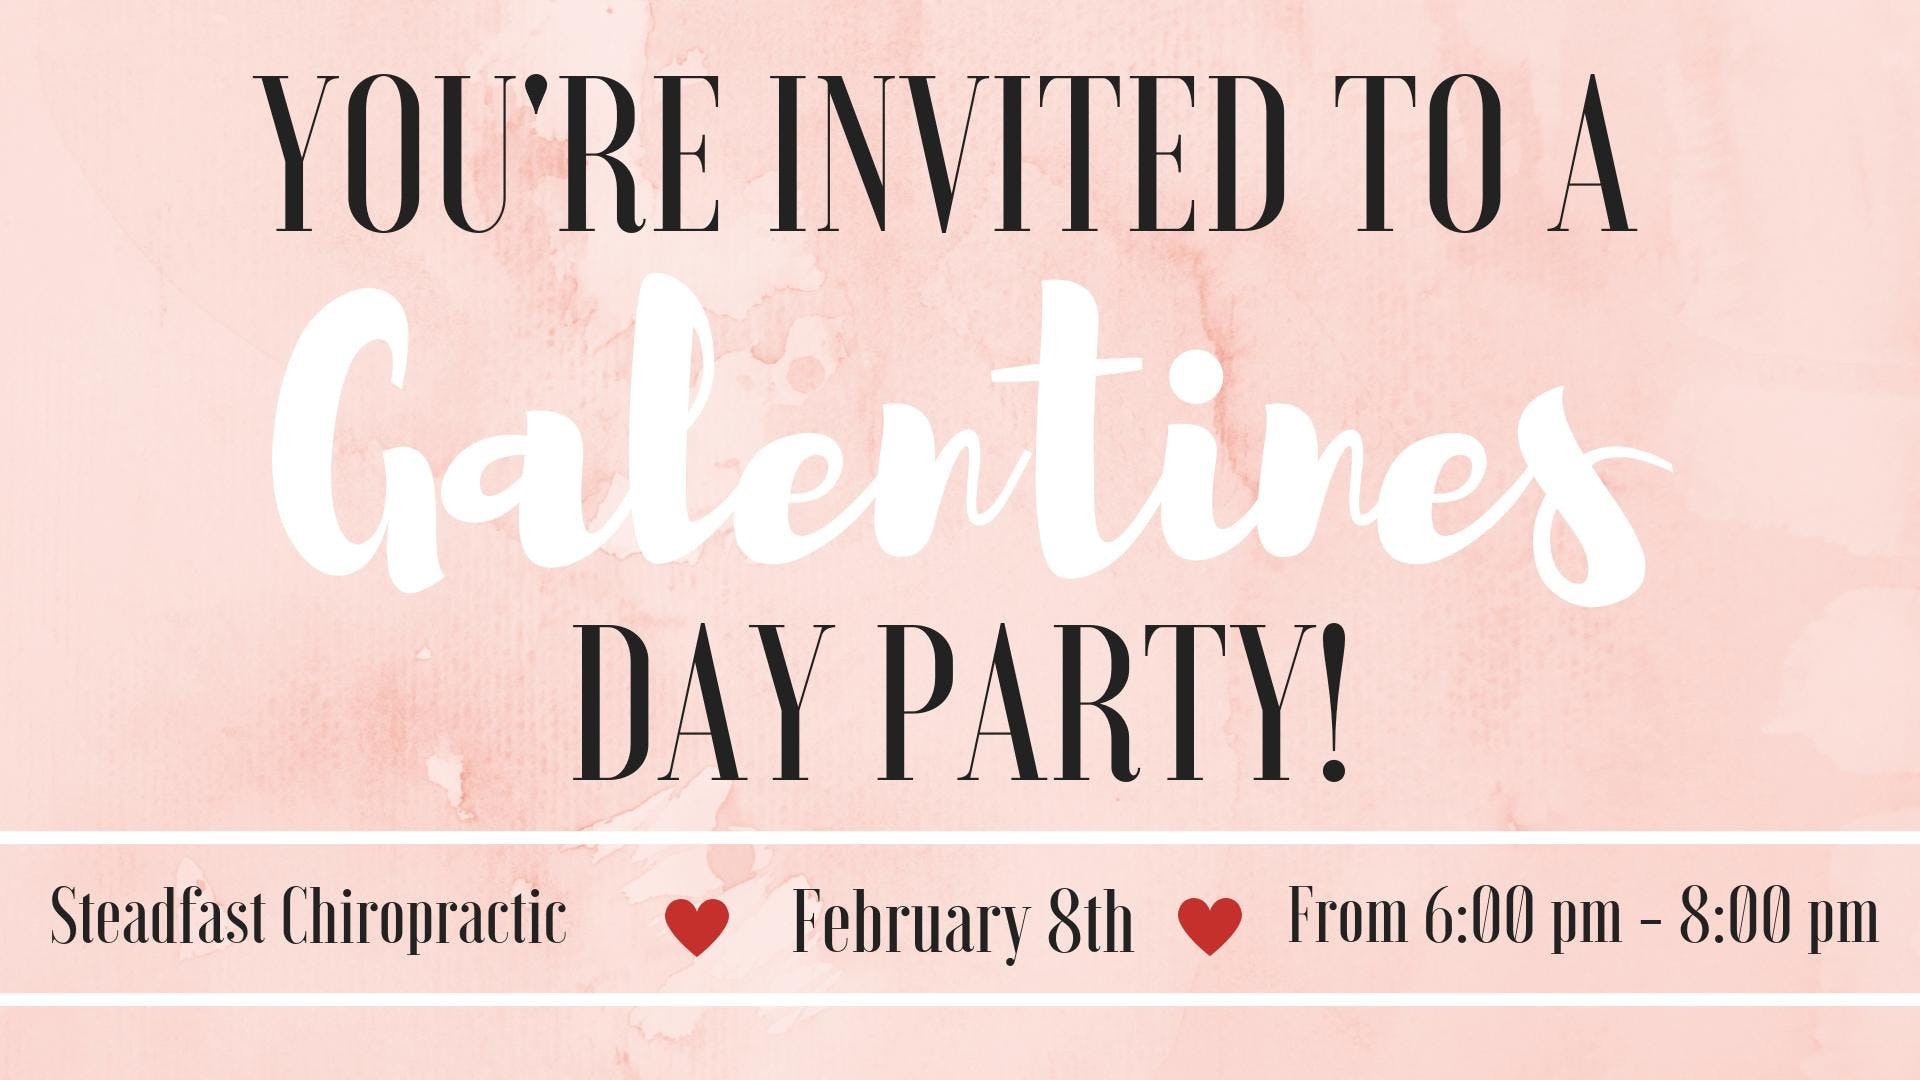 Galentine's Day Party! Shopping Event for you and your gals! FEB